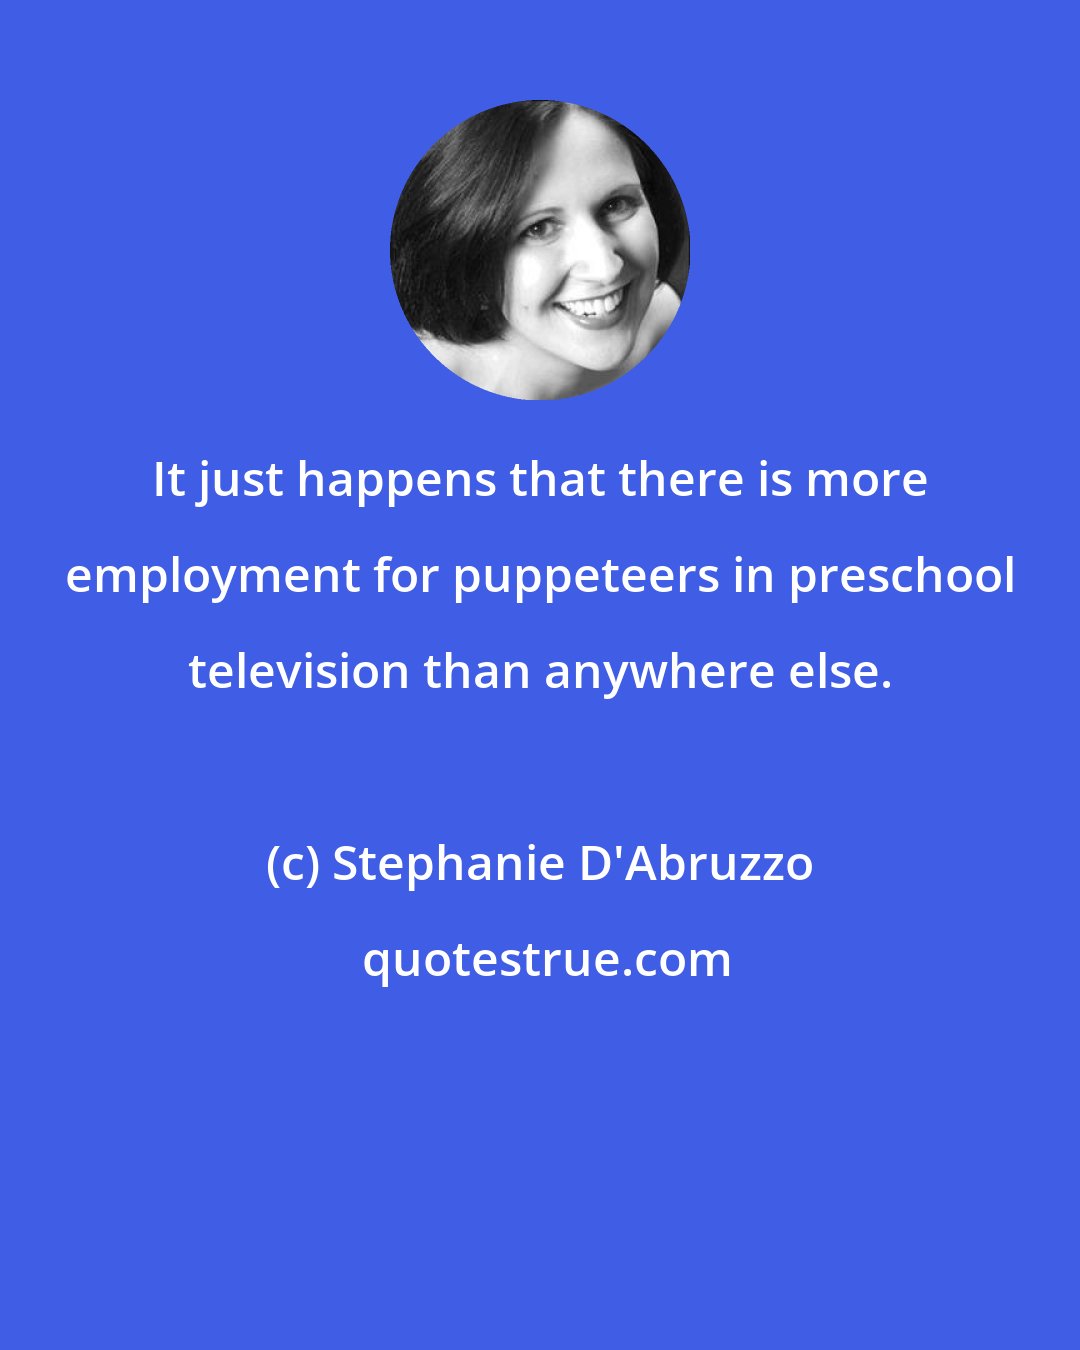 Stephanie D'Abruzzo: It just happens that there is more employment for puppeteers in preschool television than anywhere else.